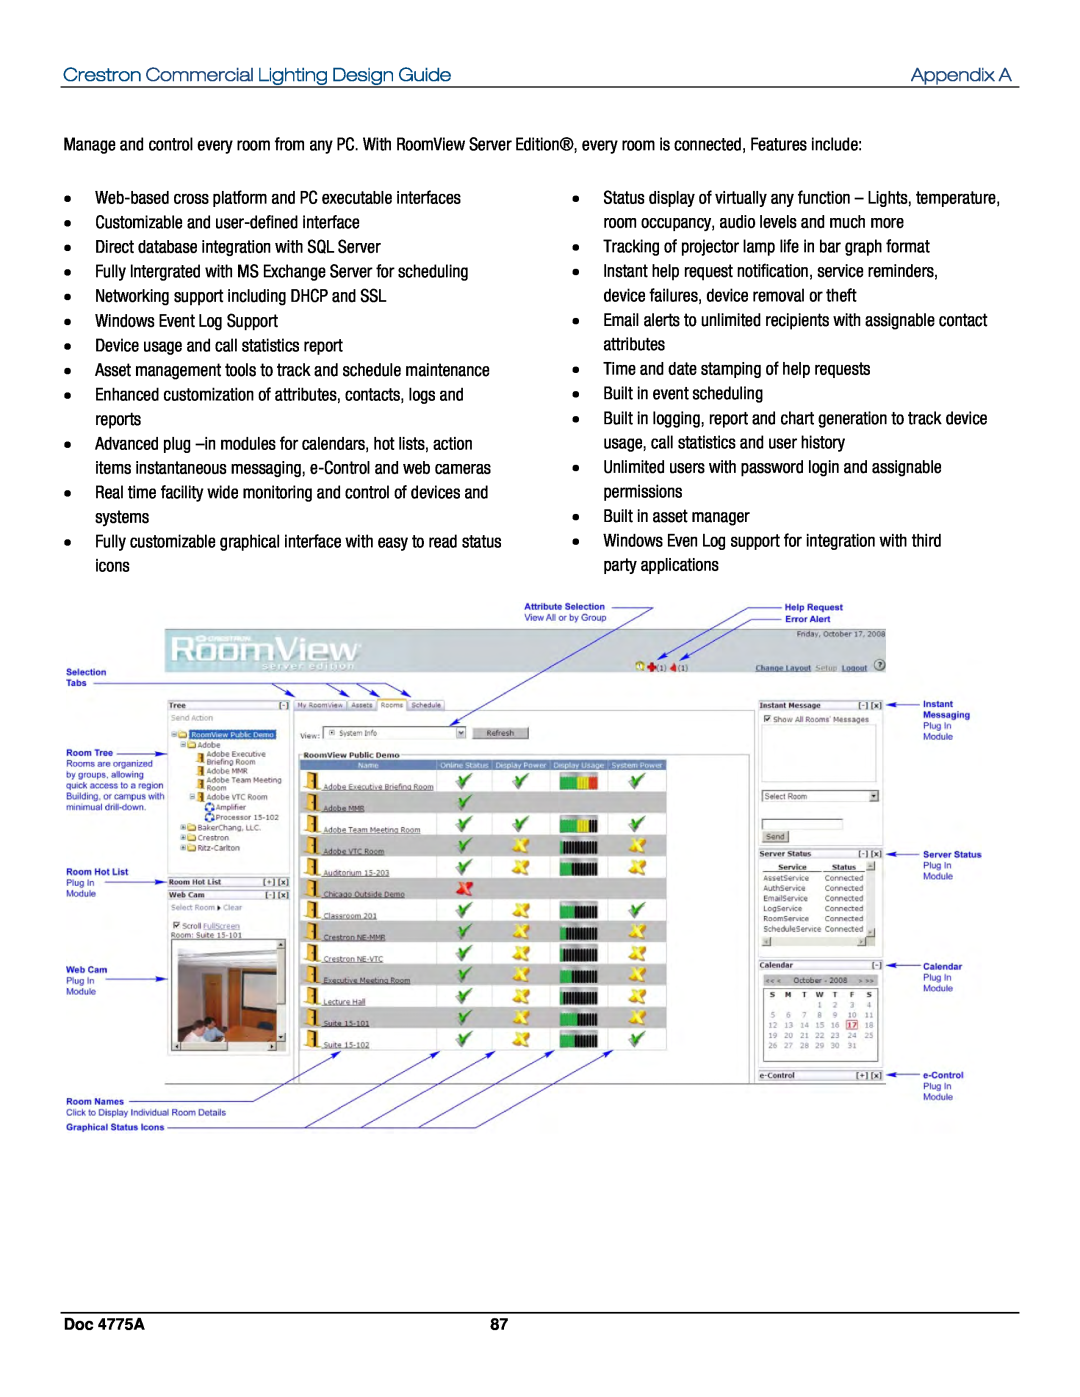 Crestron electronic IPAC-GL1, GLPS-SW-FT, GLPS-HSW, GLPS-HDSW-FT Appendix A, Crestron Commercial Lighting Design Guide 